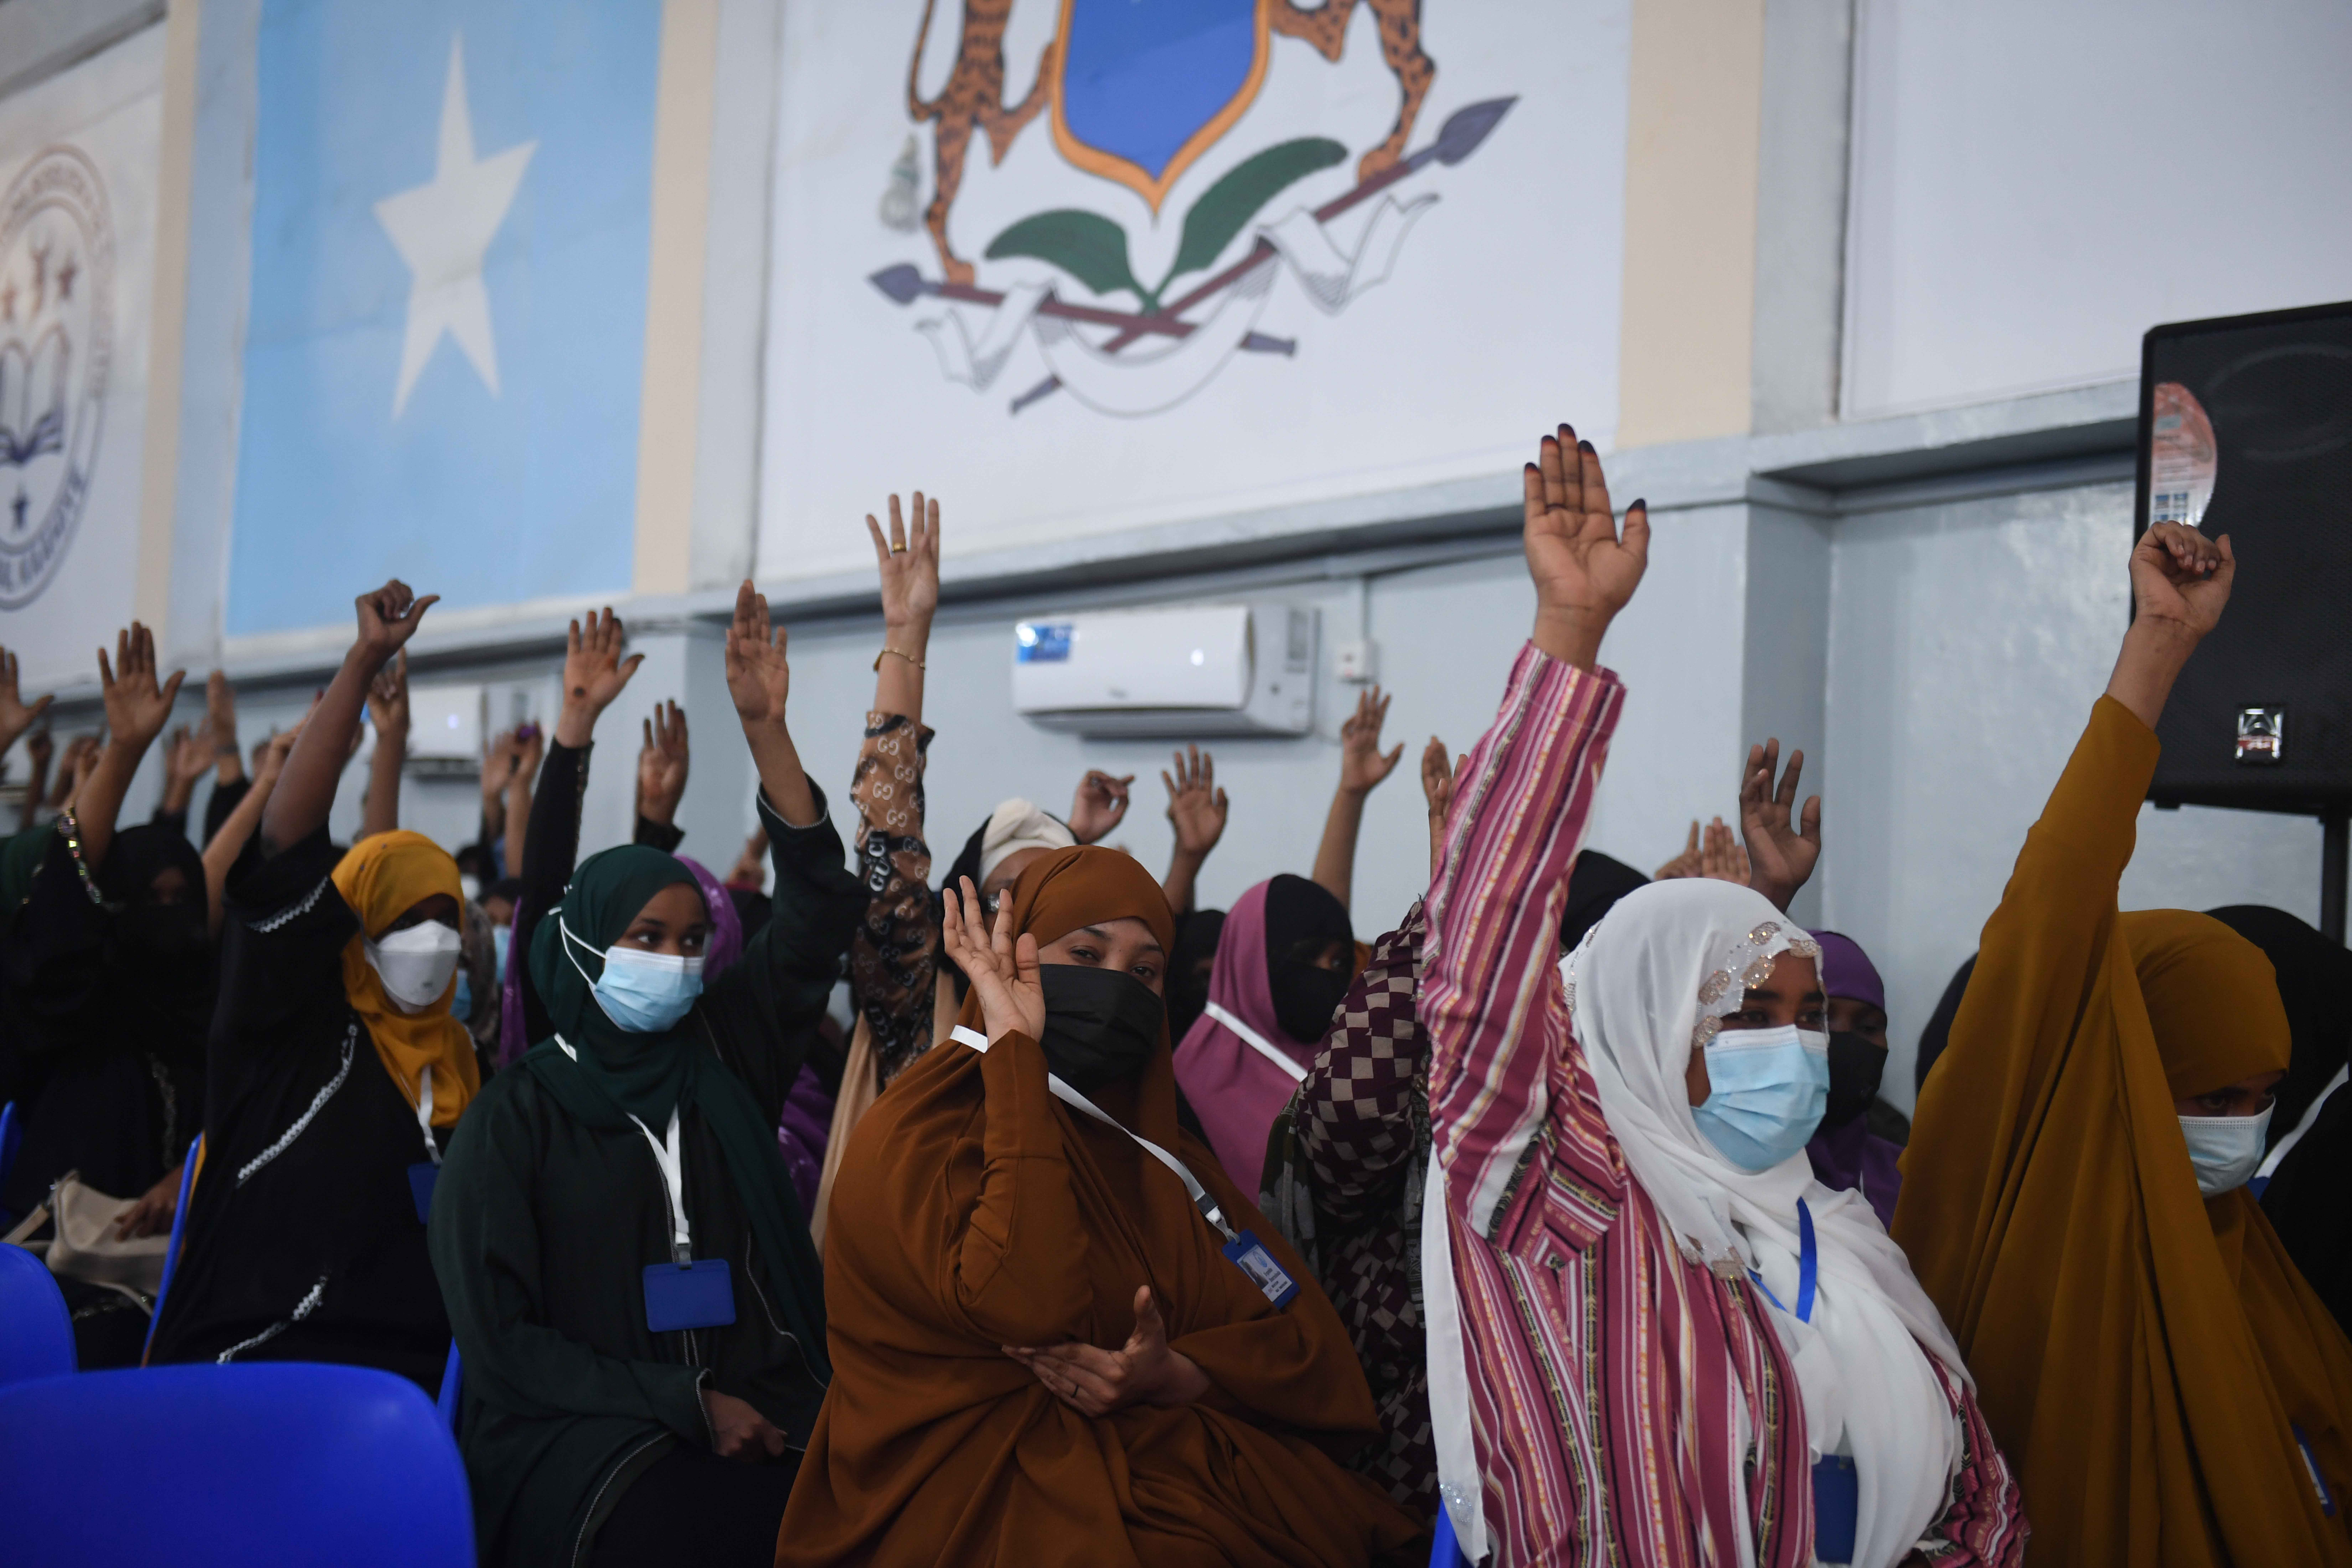 Somalia parliament approves proposal to amend indirect electoral system and reintroduce universal suffrage – JURIST